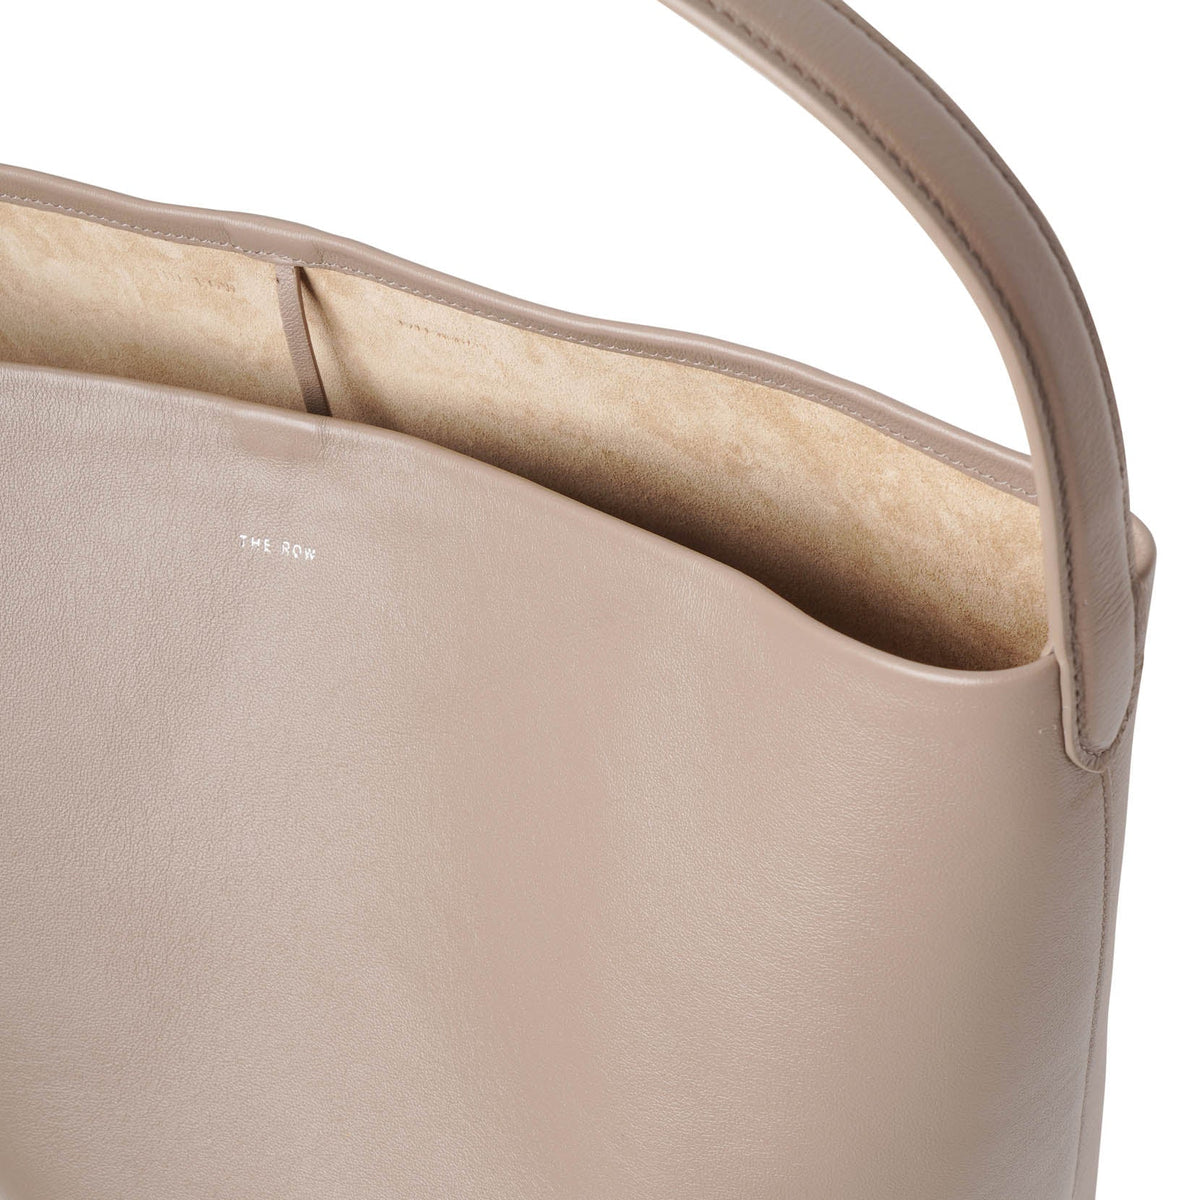 N/S Park large leather tote